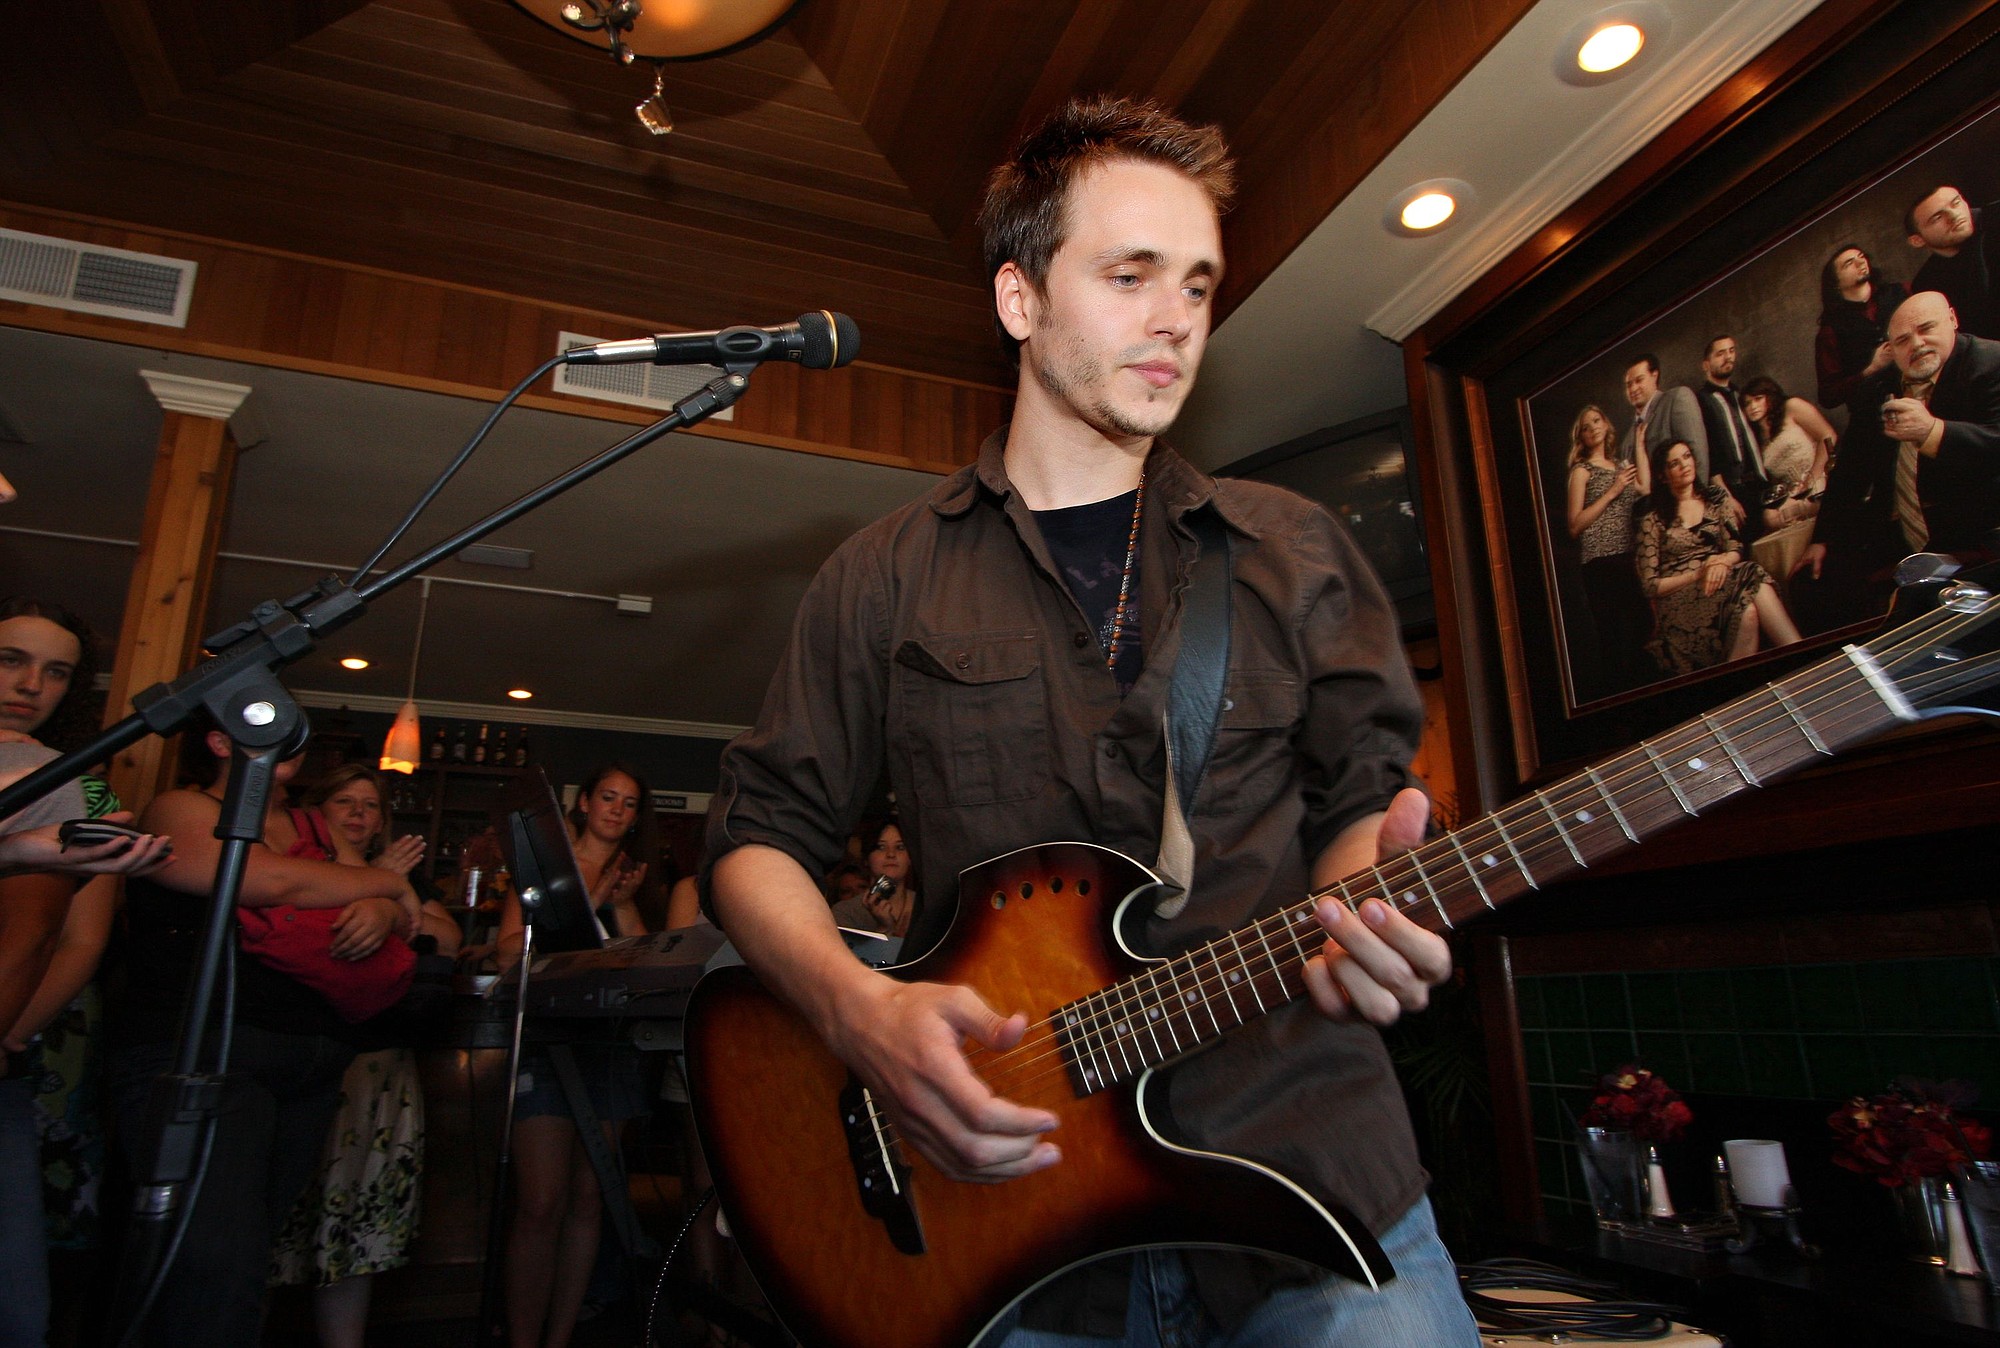 Files/The Columbian
Actor Jonathan Jackson, who's also lead singer with the band Enation, performs at the grand opening of Galeotti's Restaurant in downtown Battle Ground this summer. Jackson is reprising his award-winning role as Lucky on ABC's &quot;General Hospital.&quot;